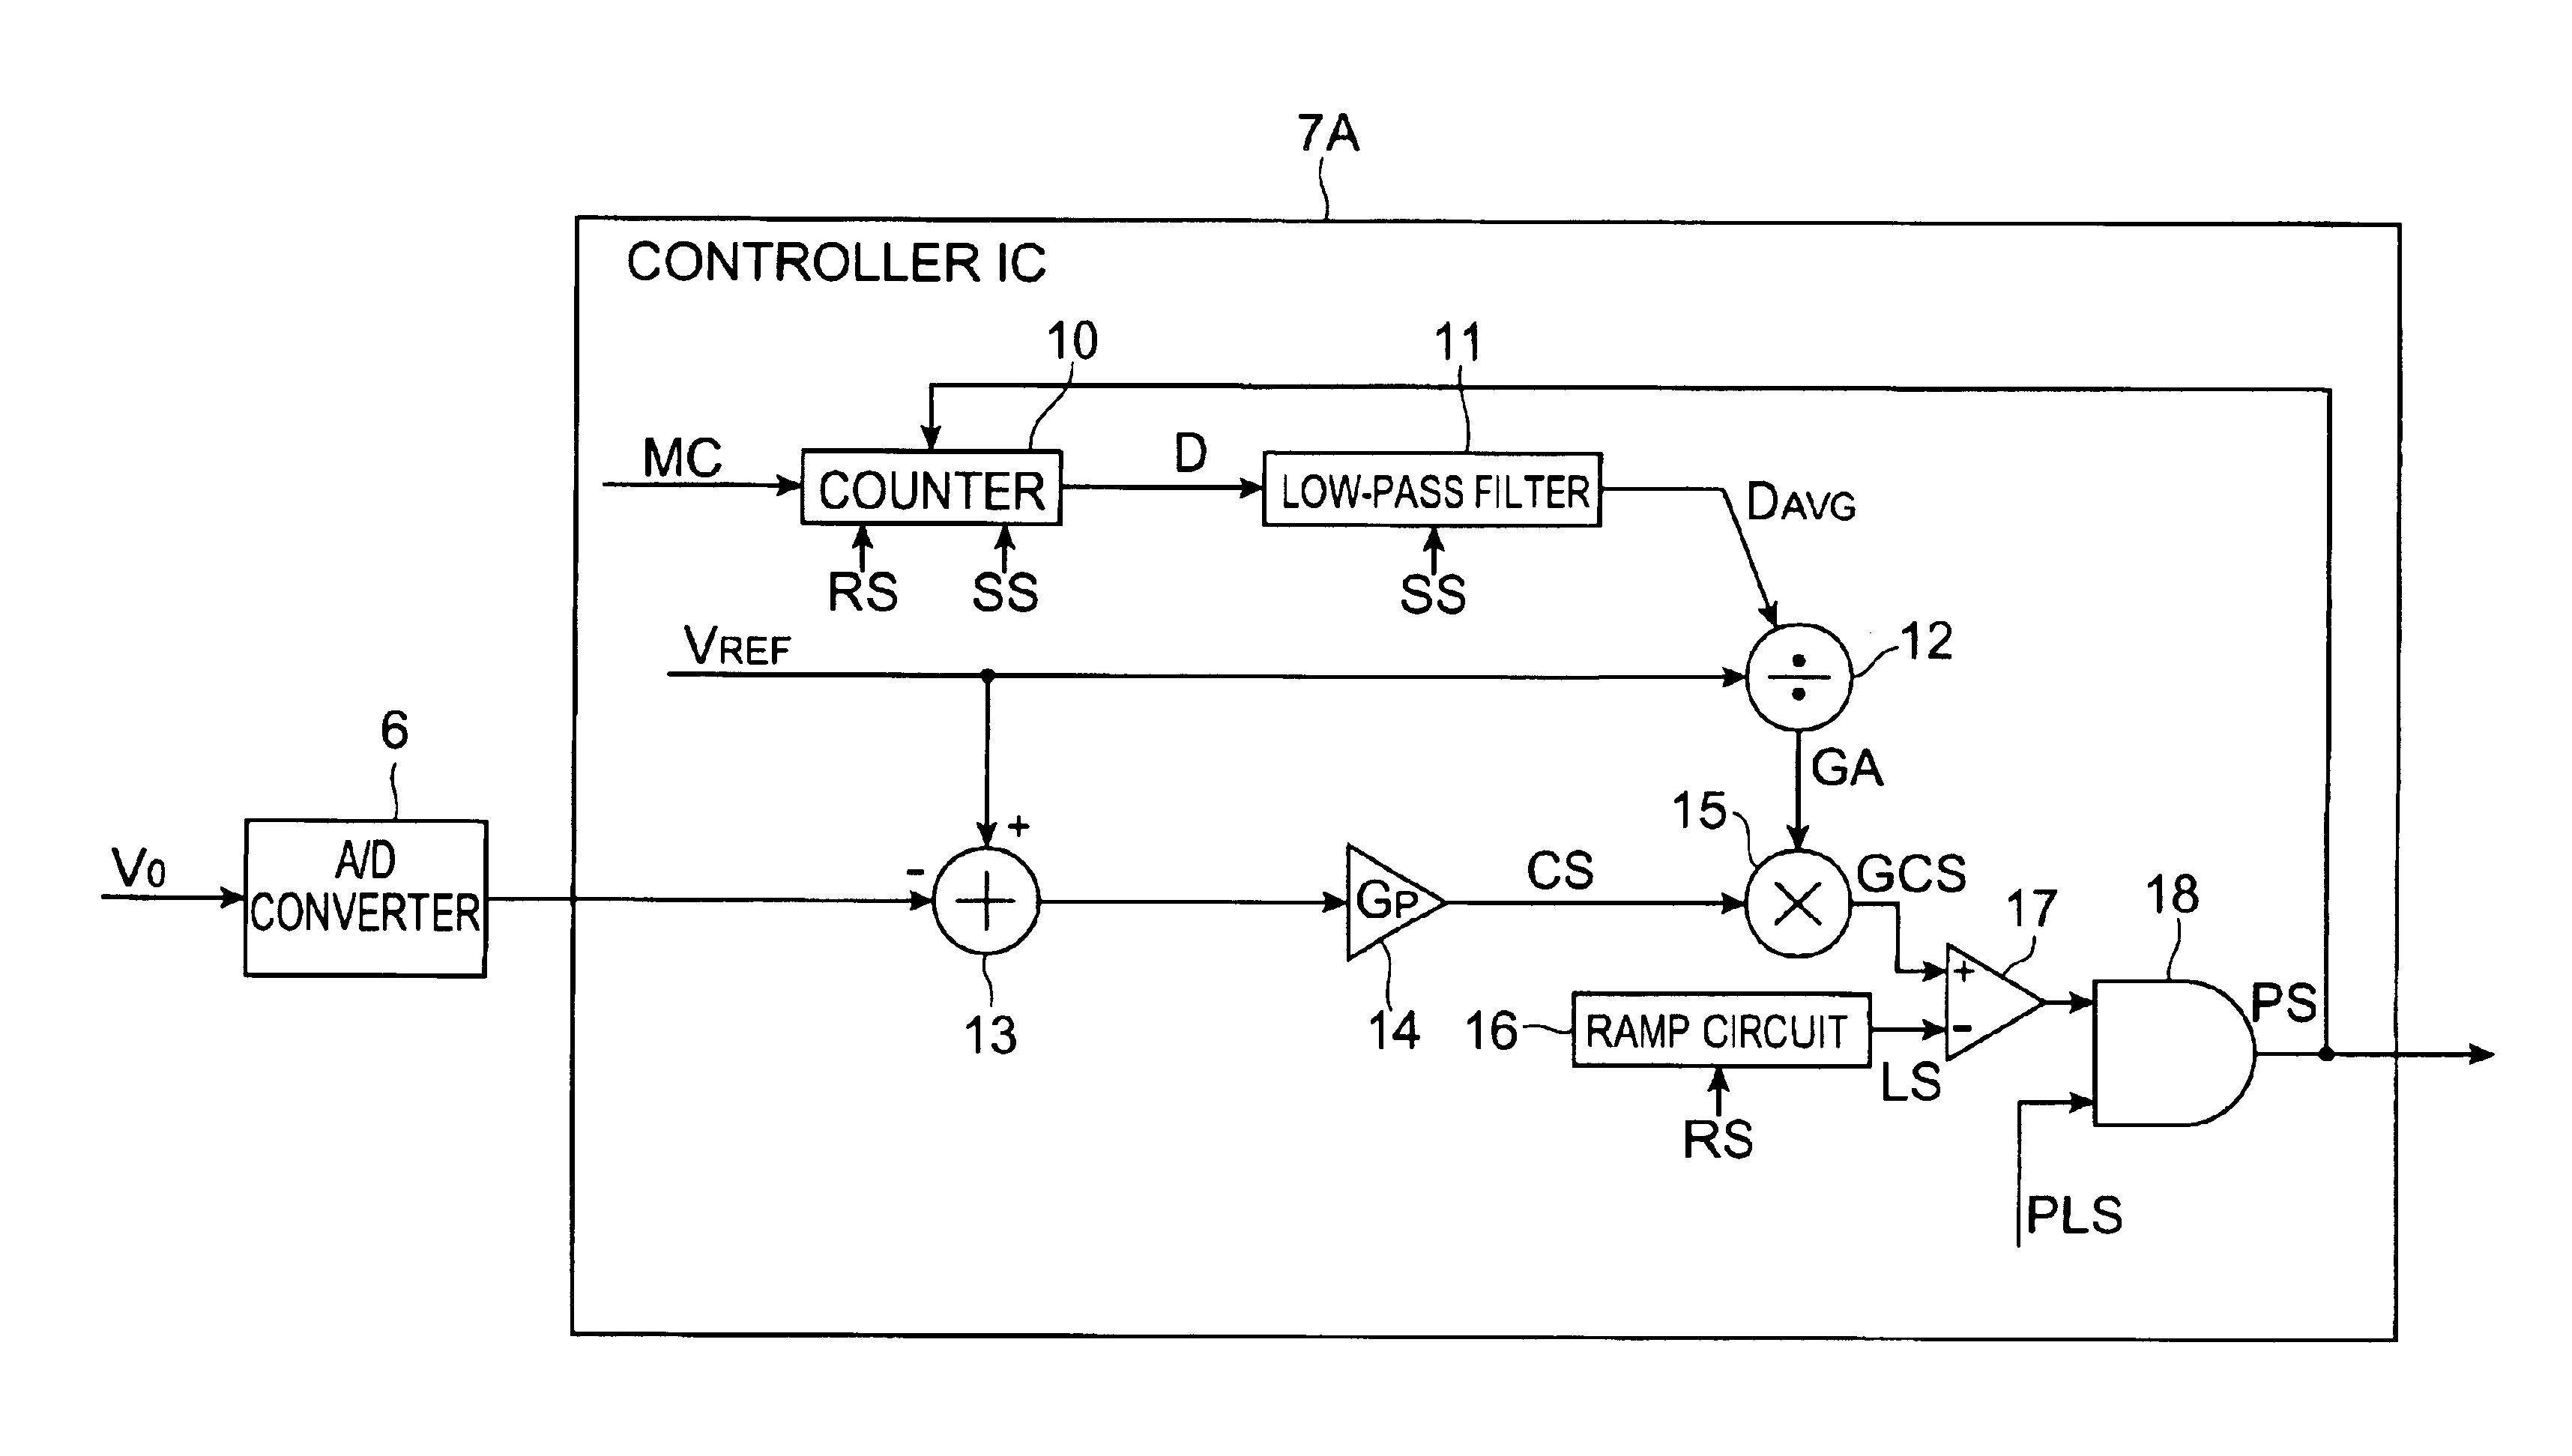 Switching power supply controller and switching power supply